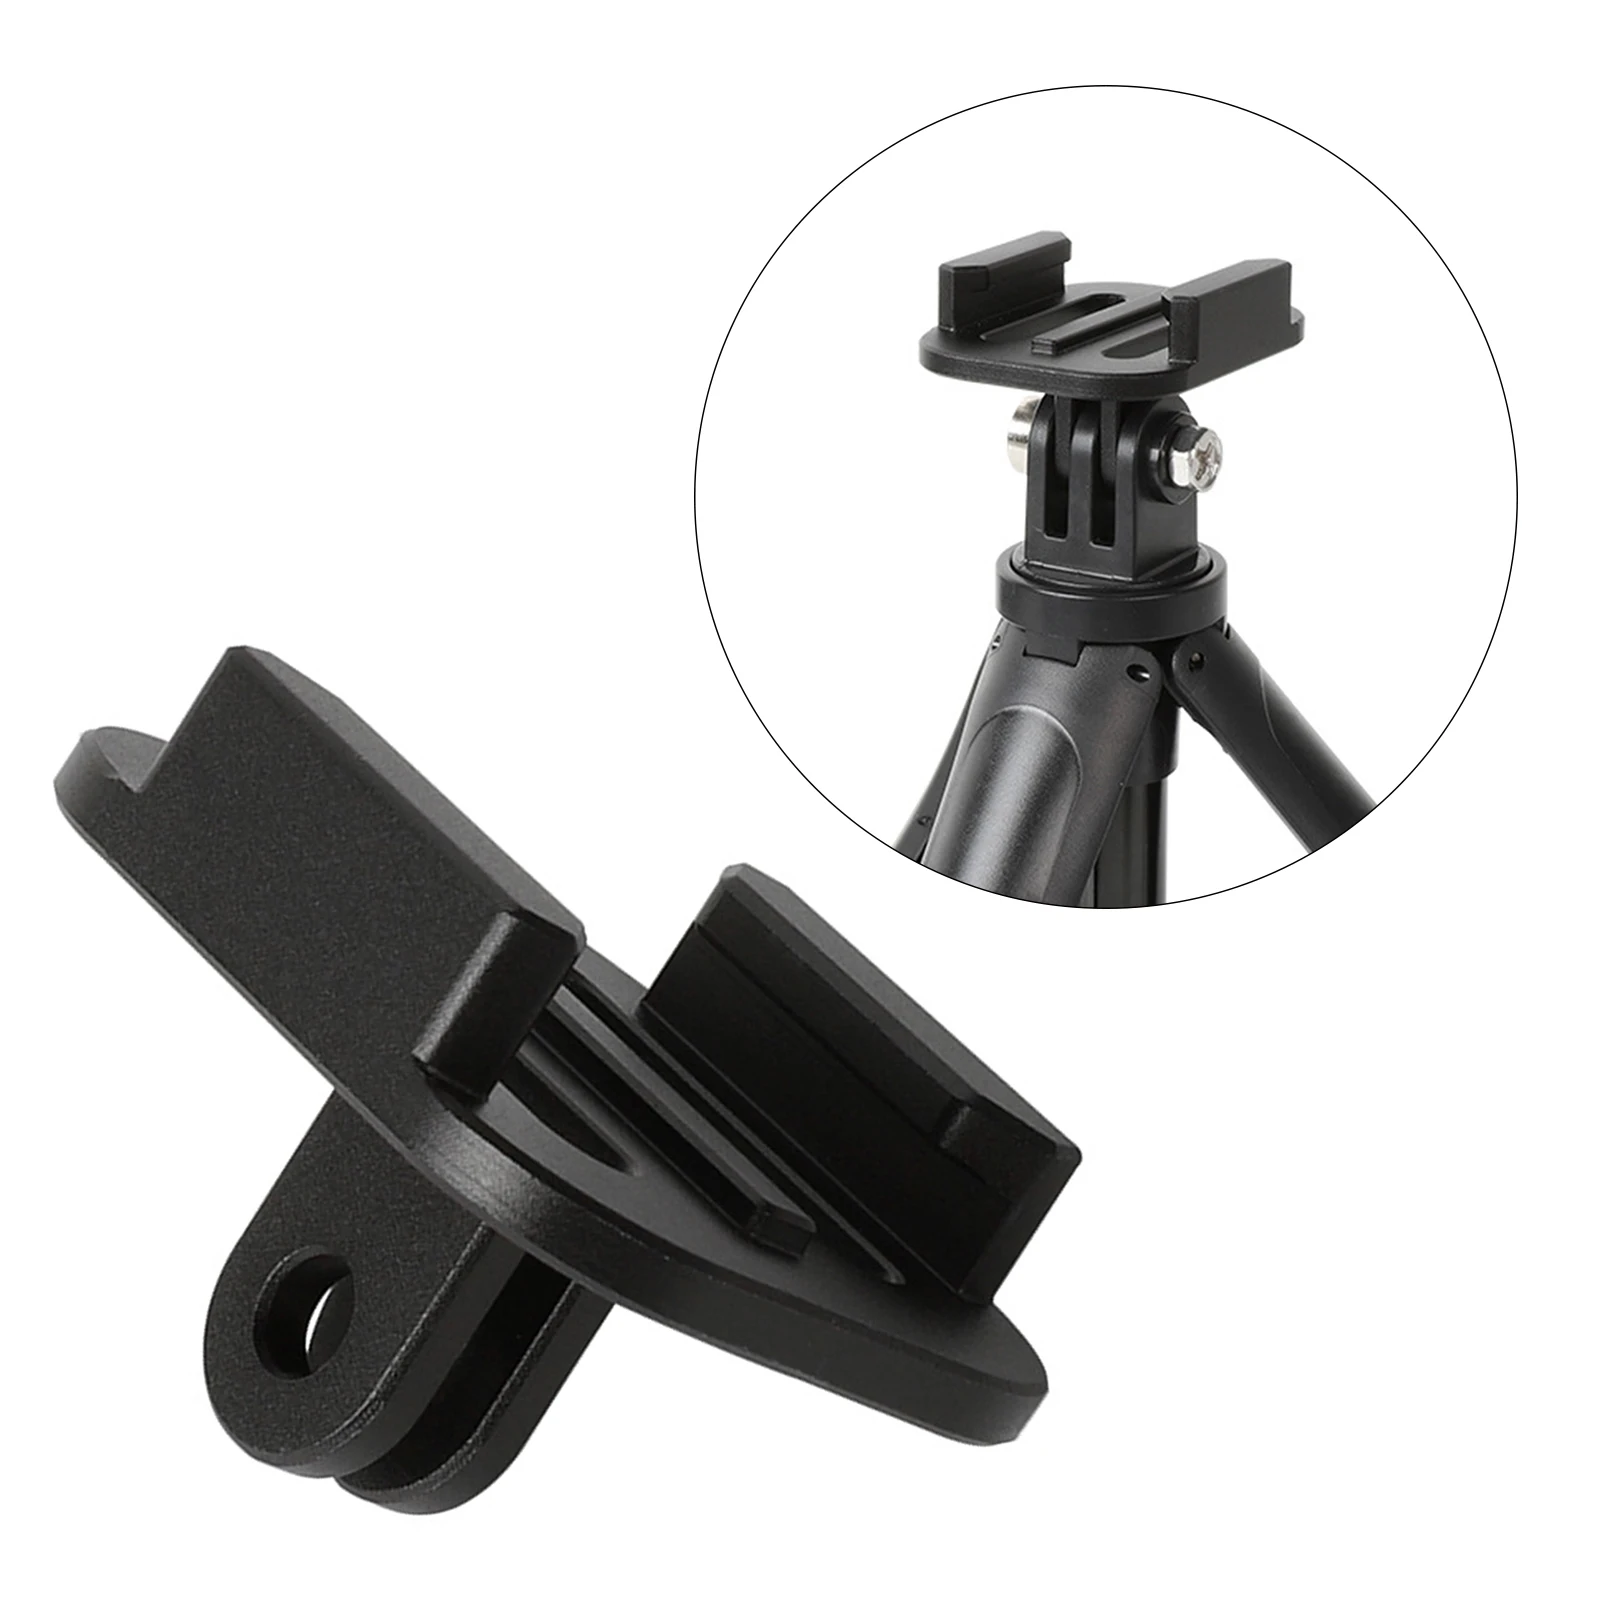 Aluminum Alloy, Camera Release Mount Base Adapter, for Action Cameras Accessories 1 Piece